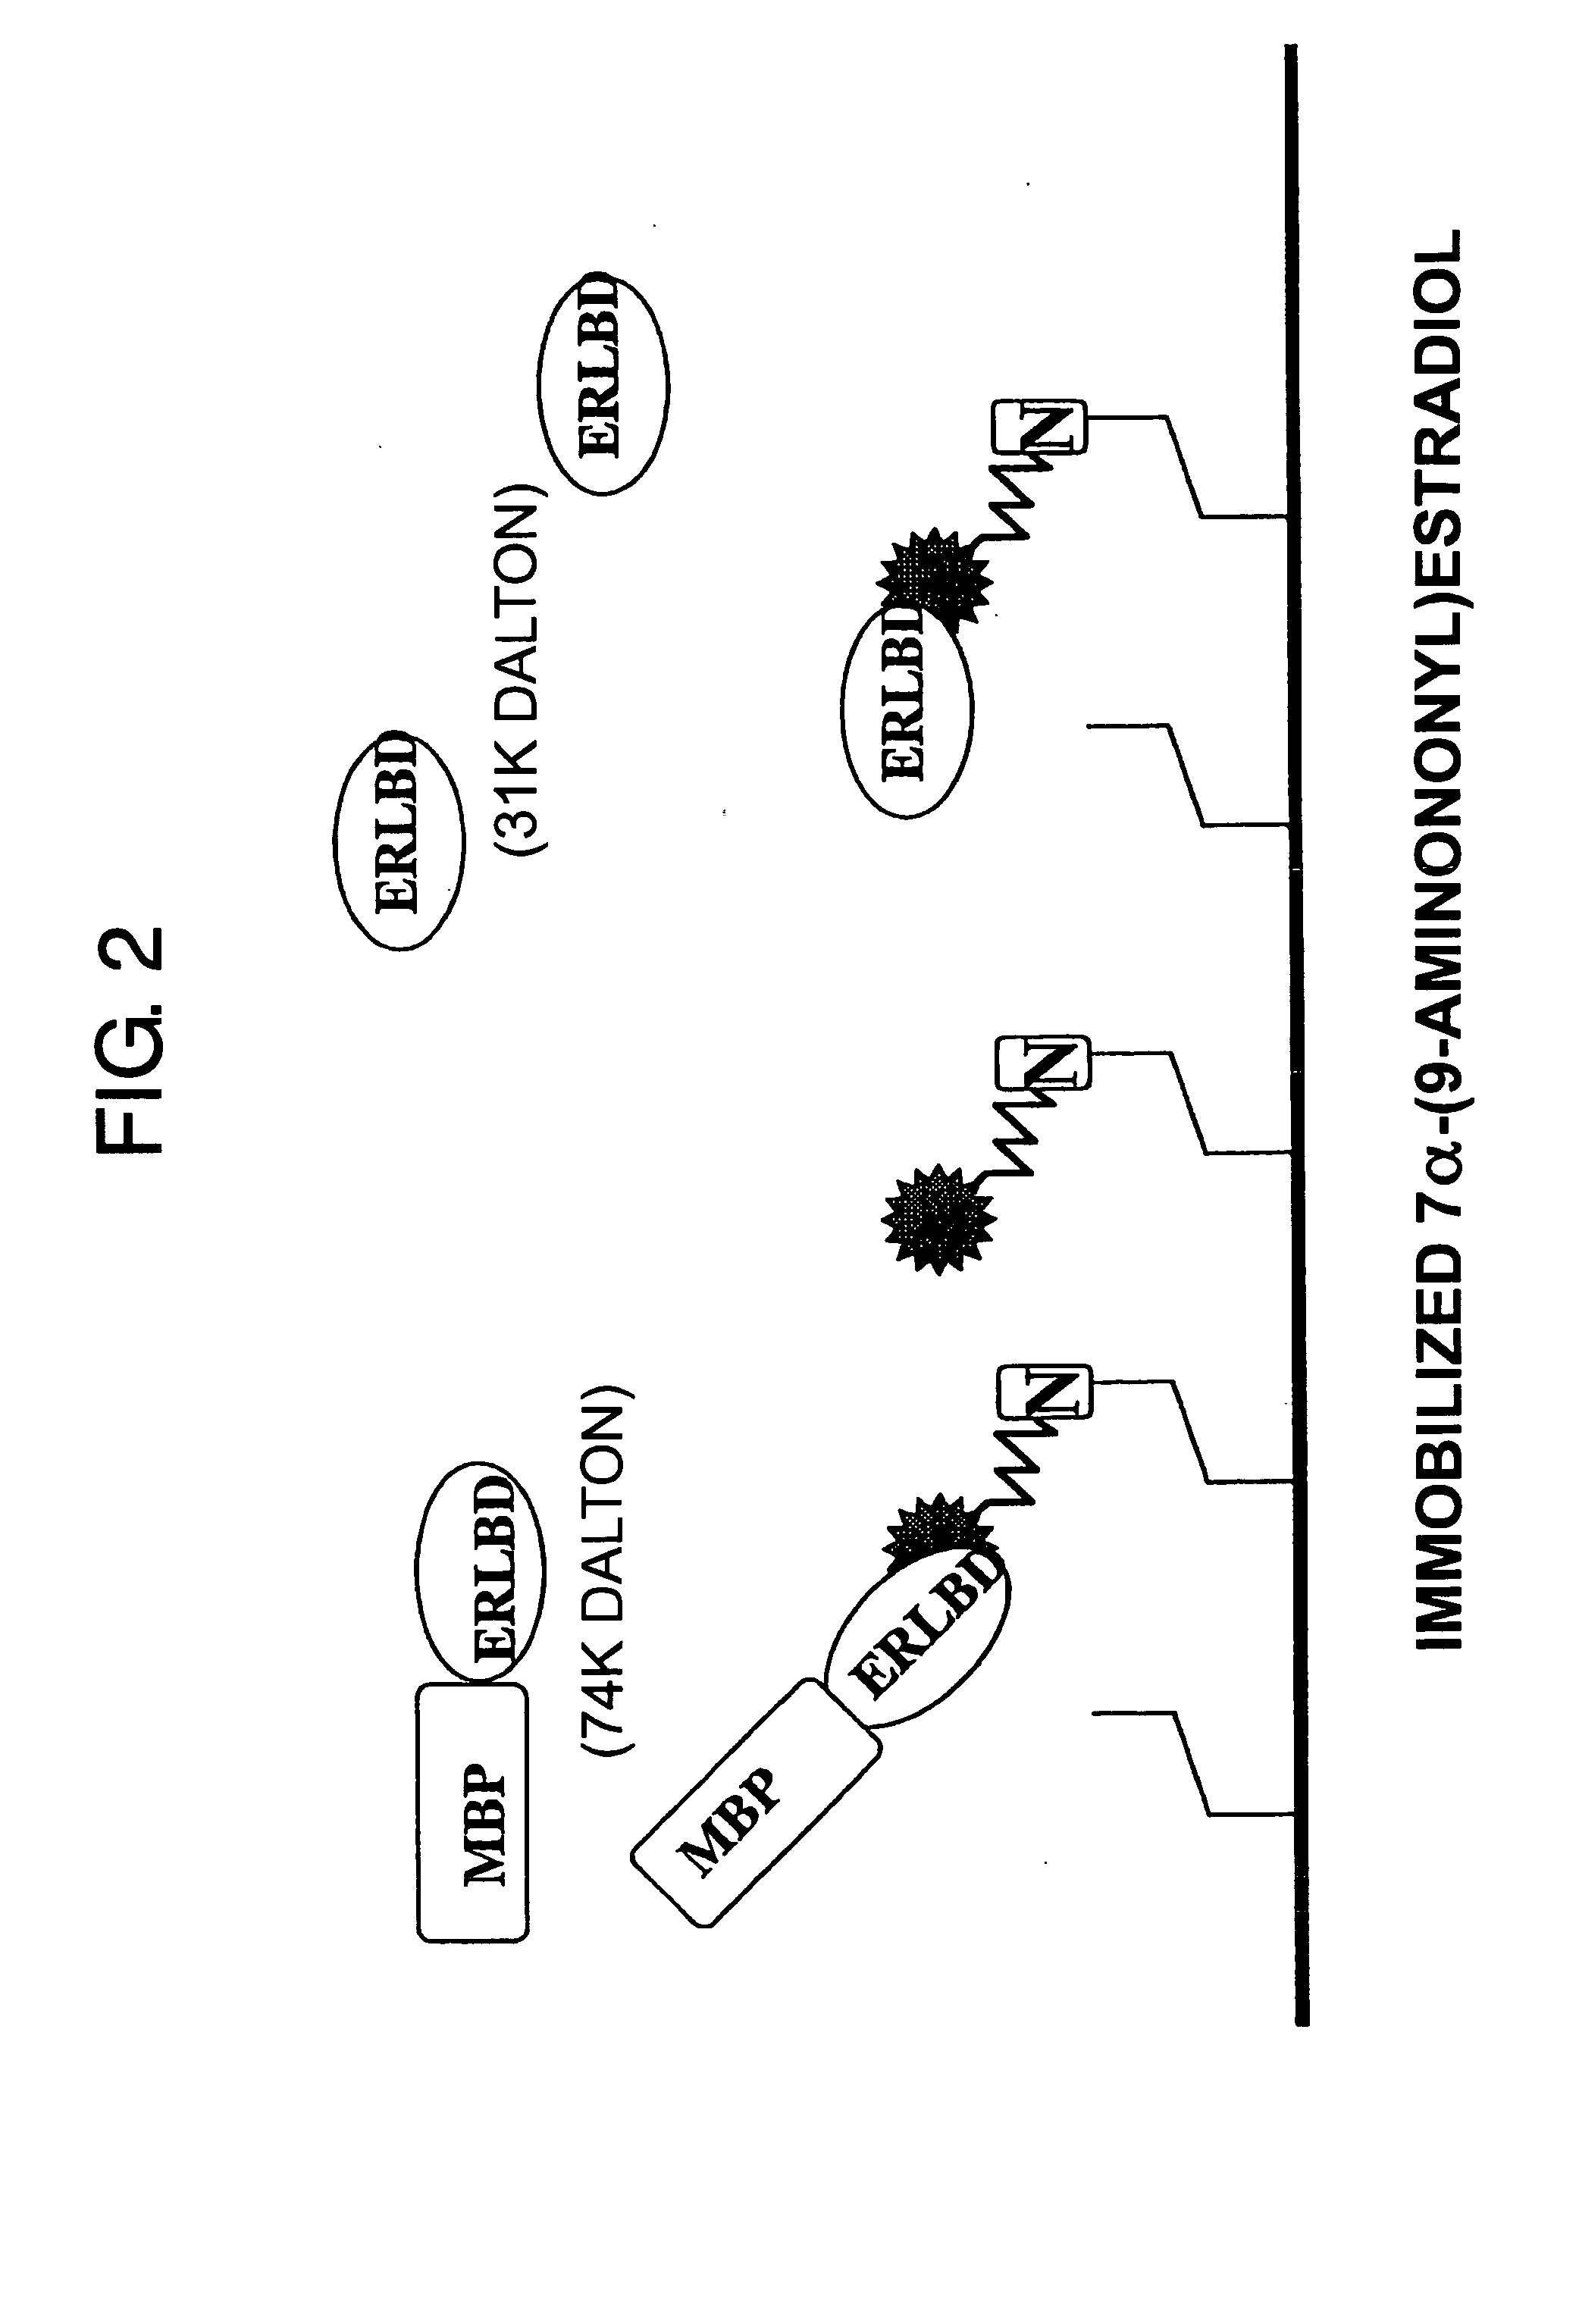 Methods for detecting binding of low-molecular-weight compound and its binding partner molecule